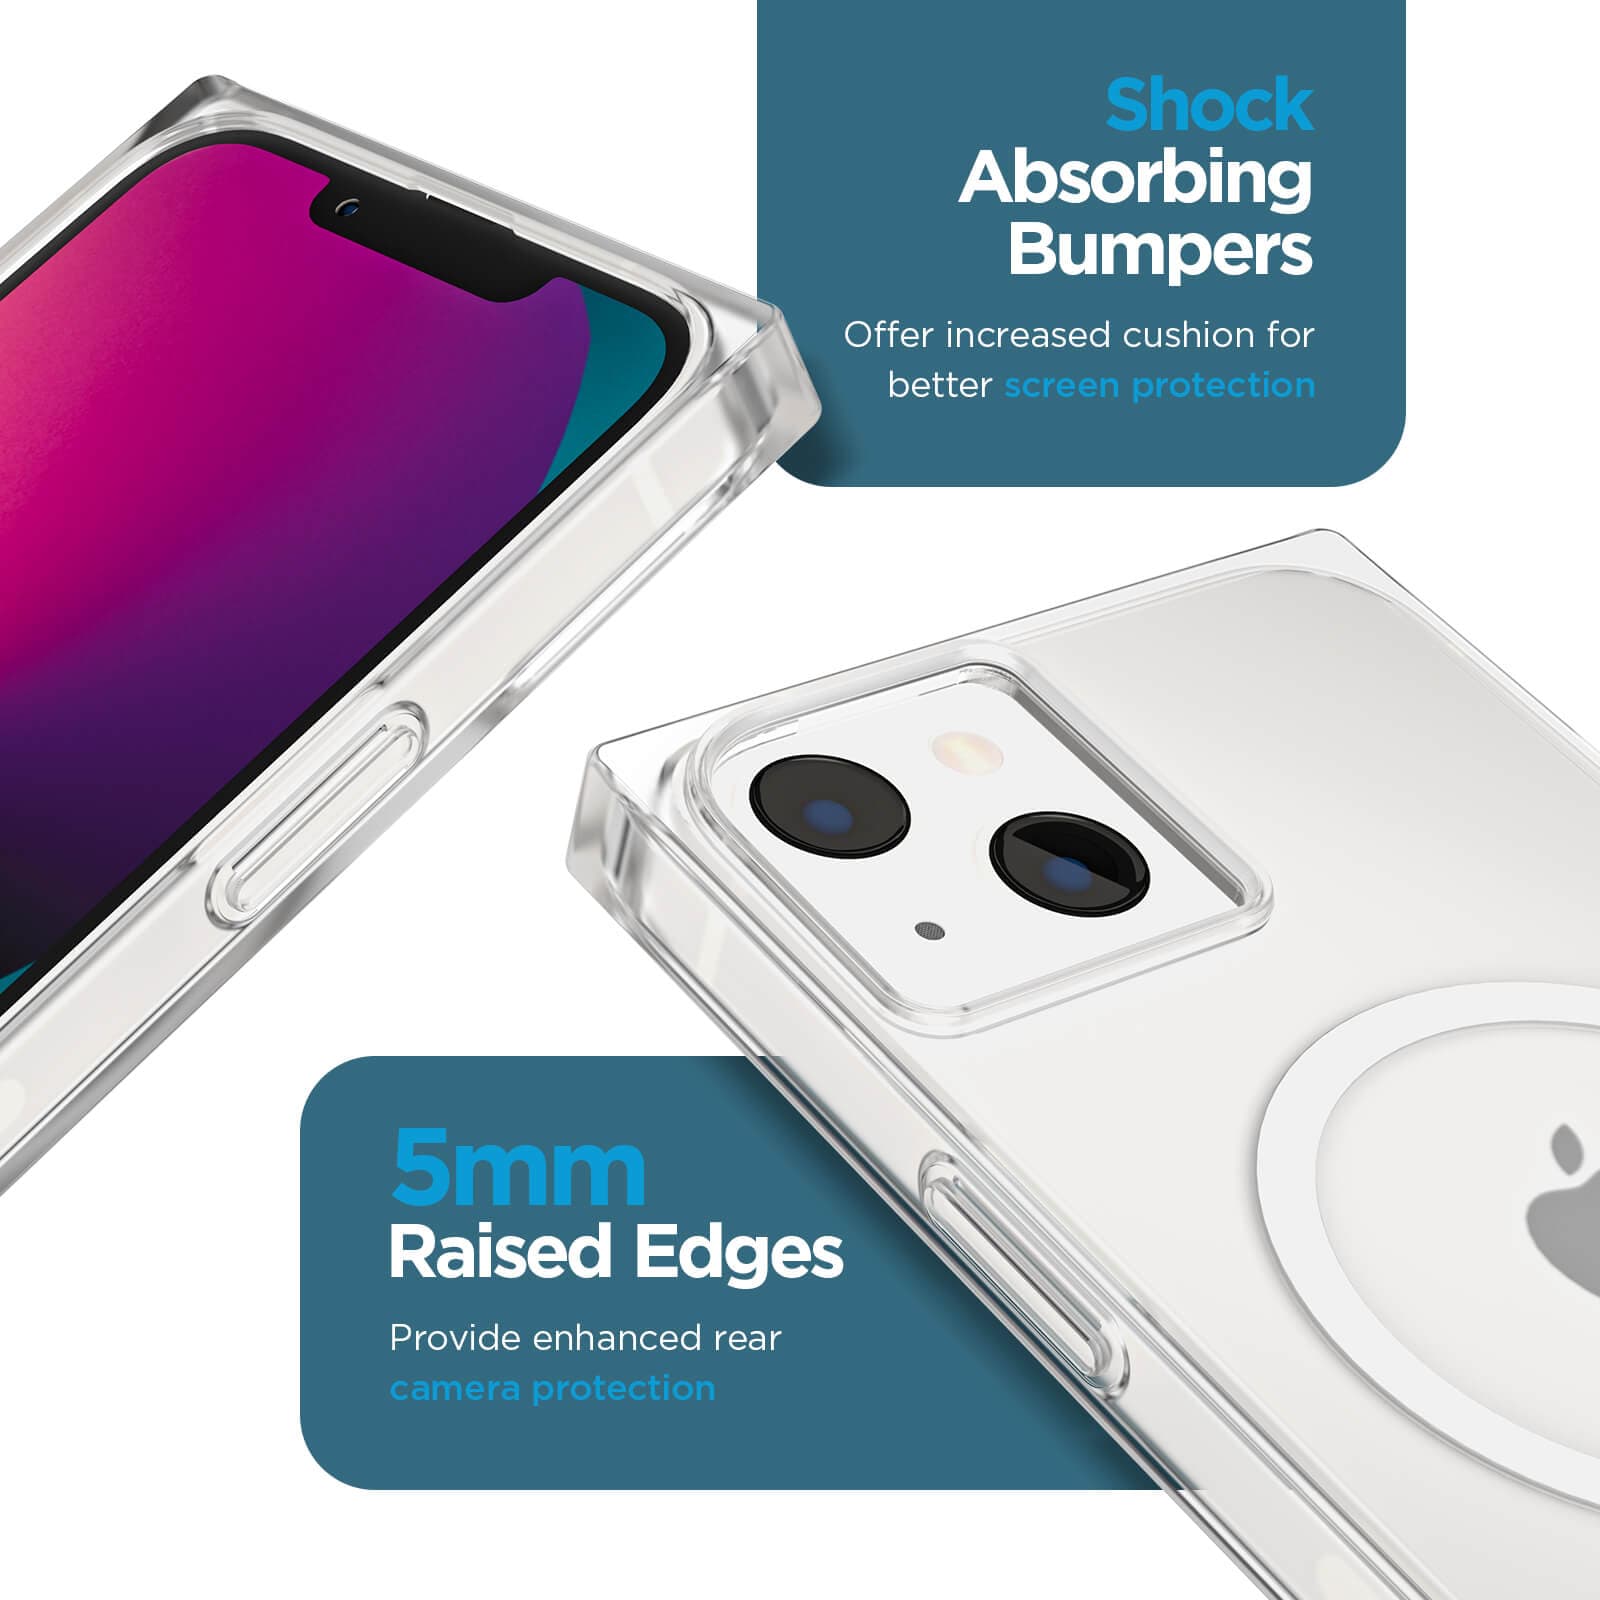 Shock absorbing bumpers offer increased cushion for better screen protection. 5mm raised edges provide enhanced rear camera protection. color::Clear